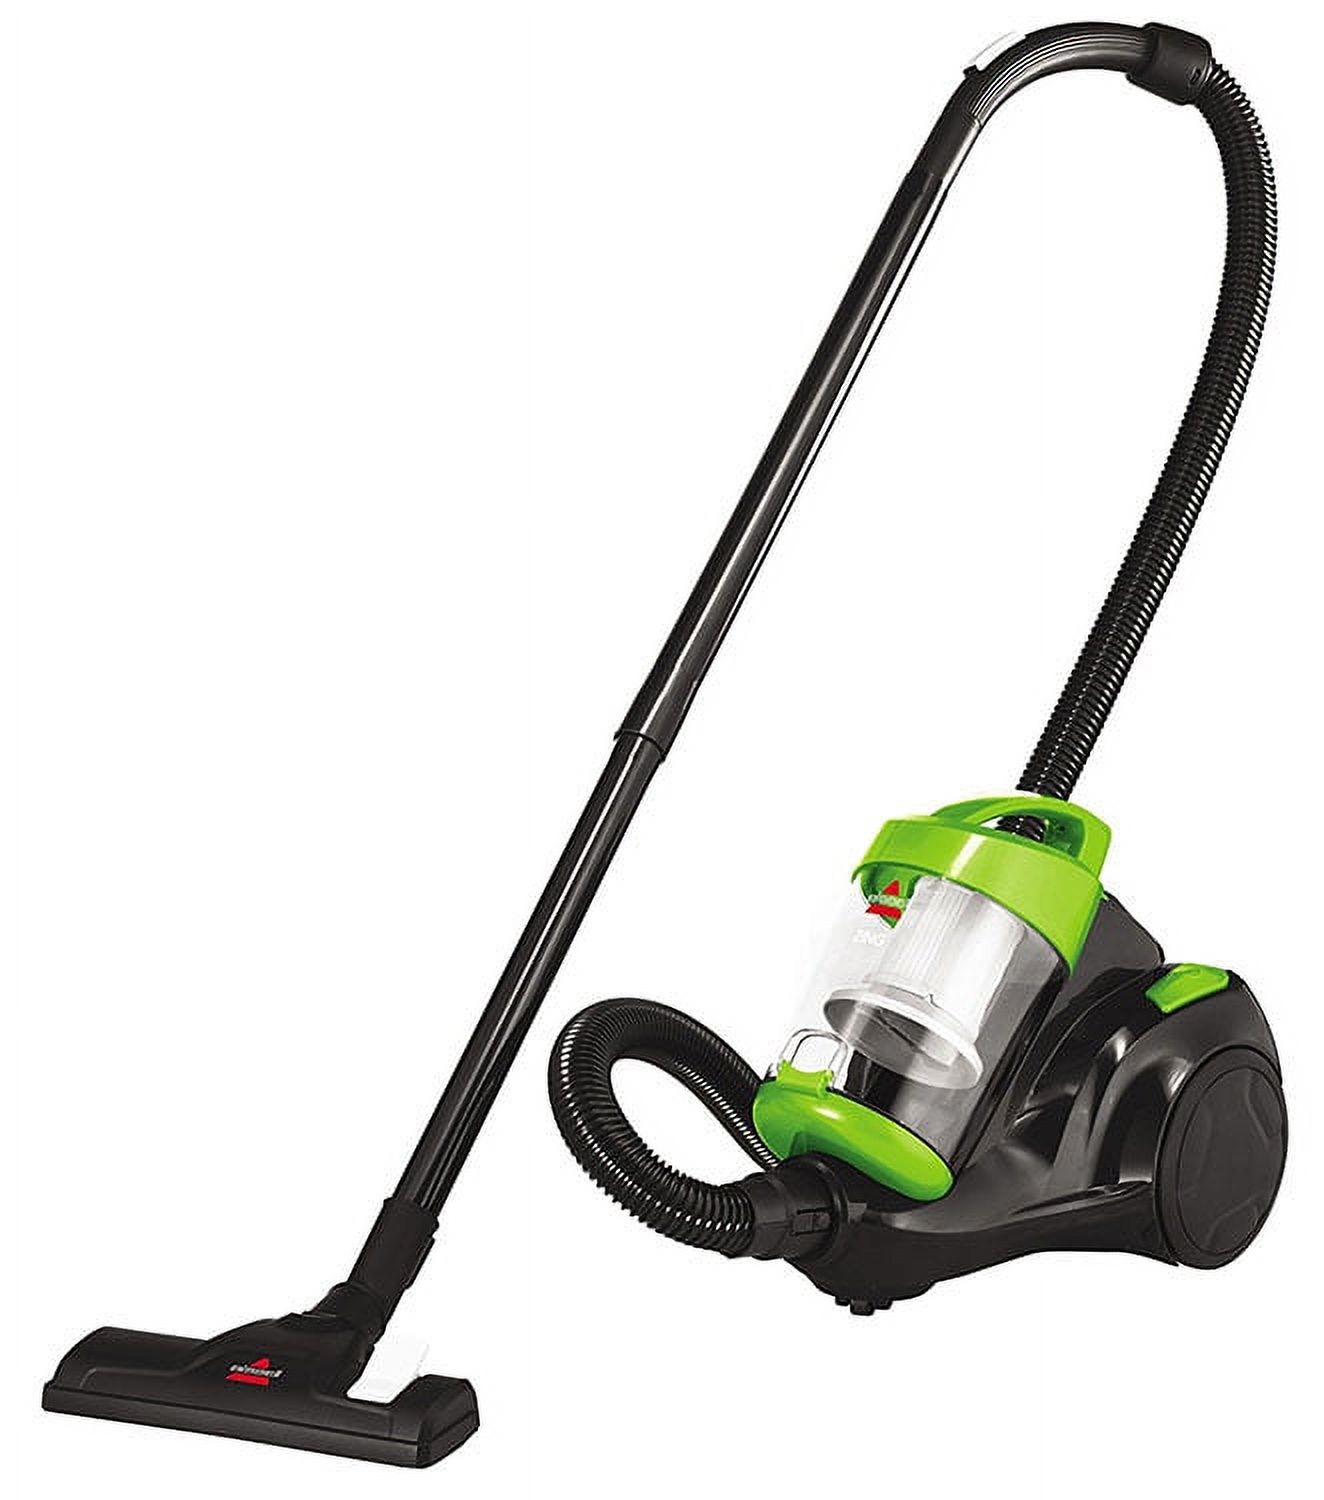 BISSELL Zing Bagless Canister Vacuum, 2156A - image 1 of 7